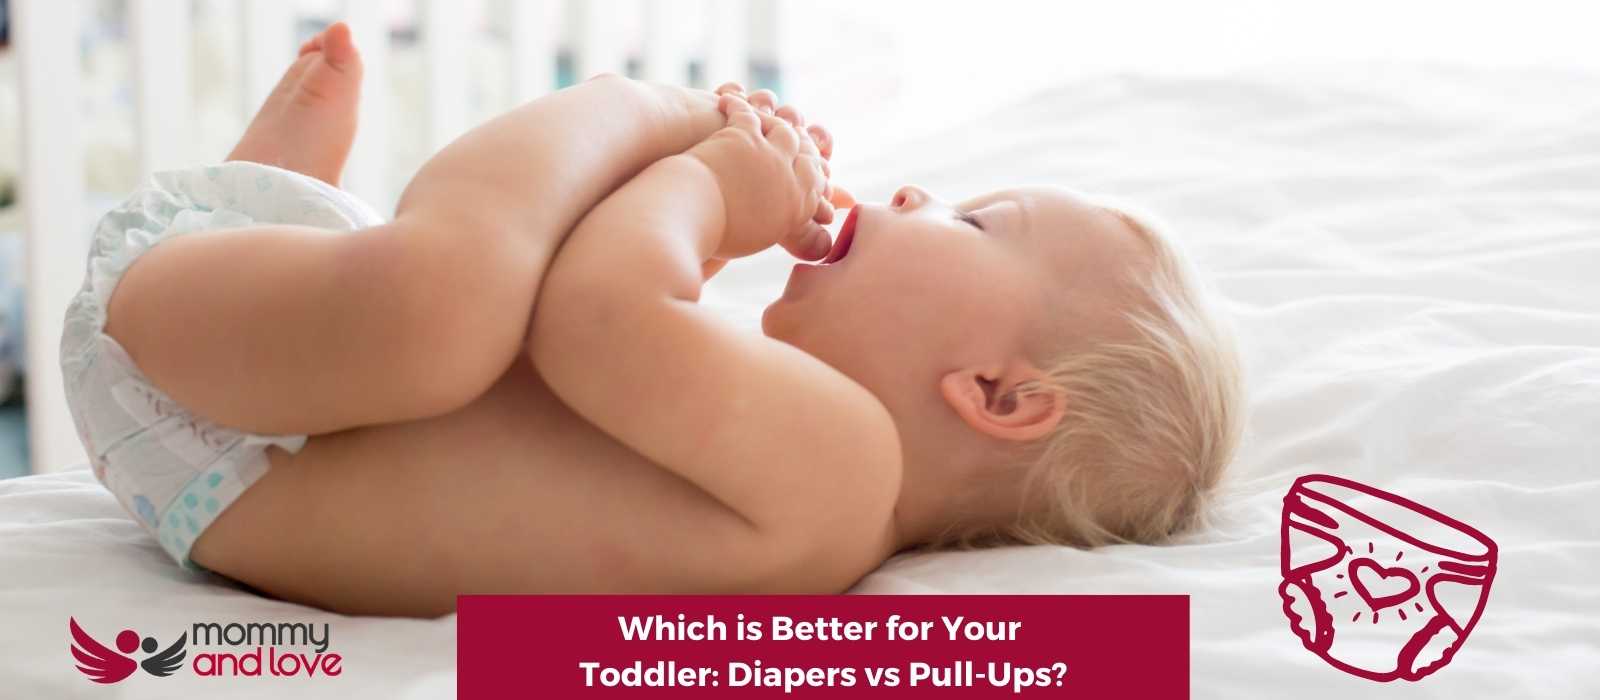 Which is Better for Your Toddler Diapers vs Pull-Ups